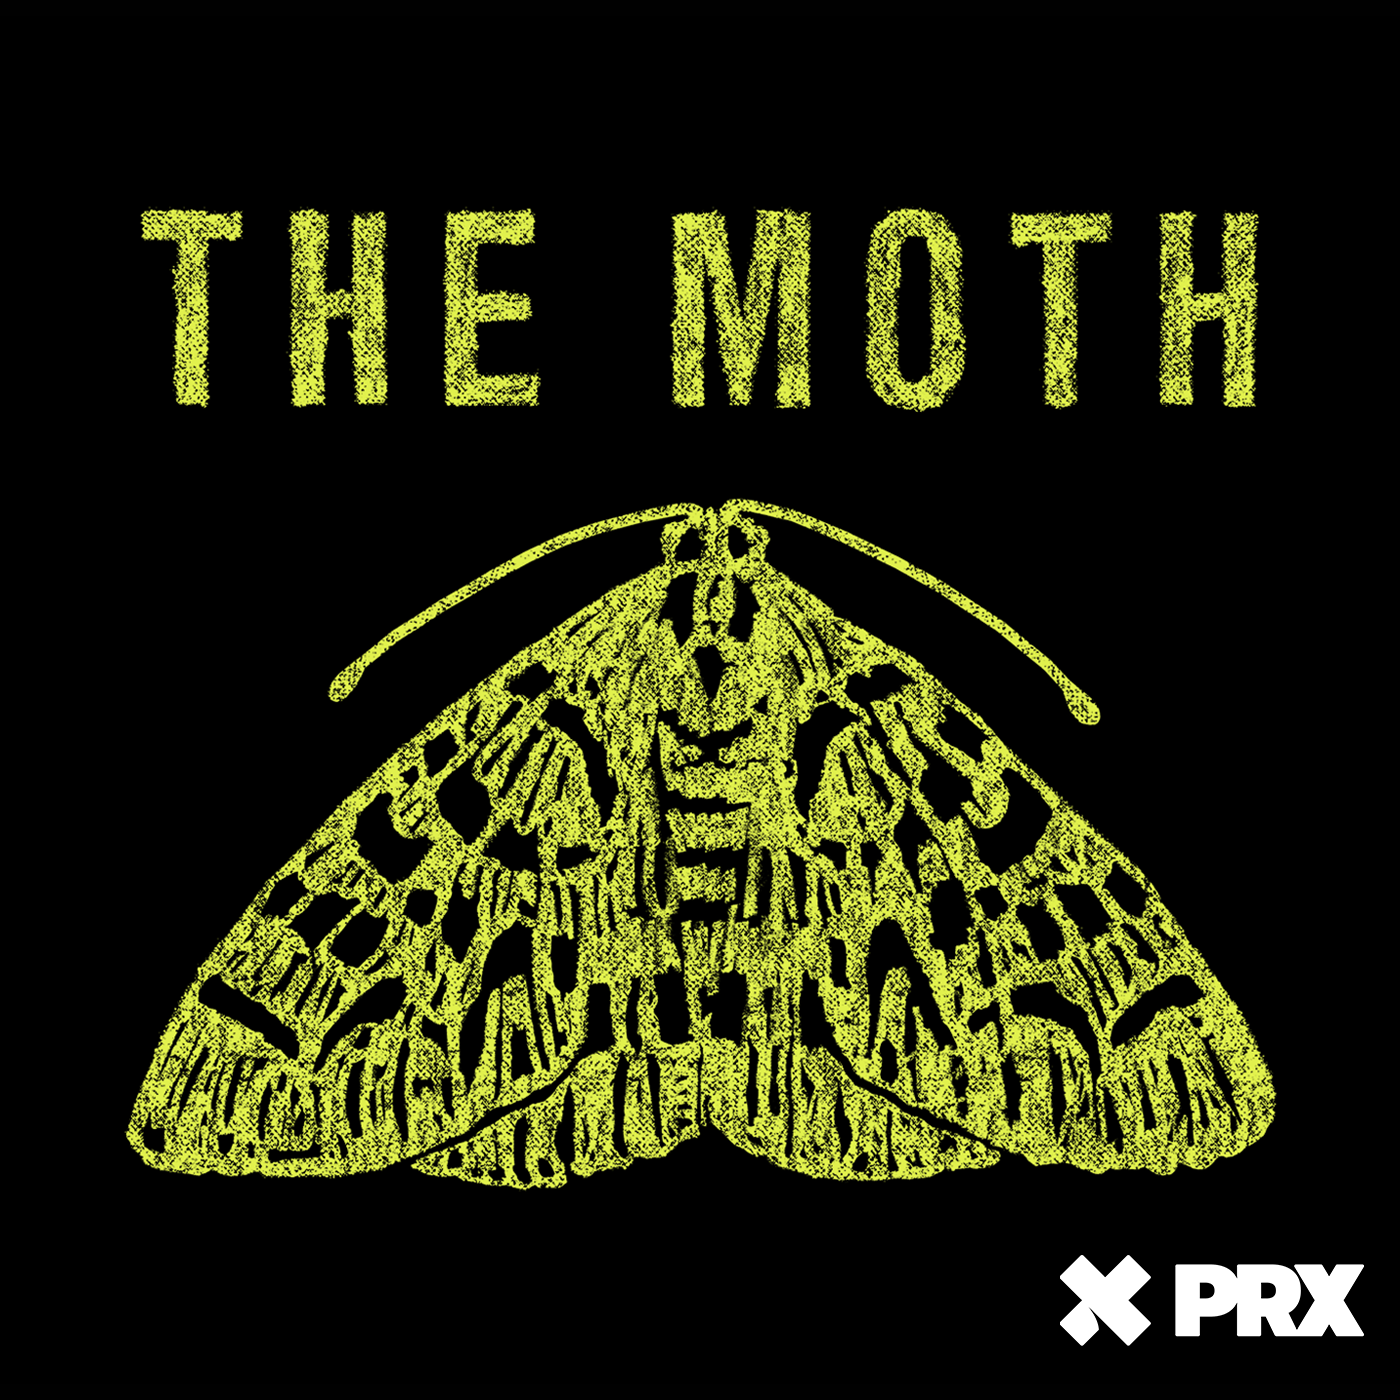 The Moth Radio Hour: Object of Desire